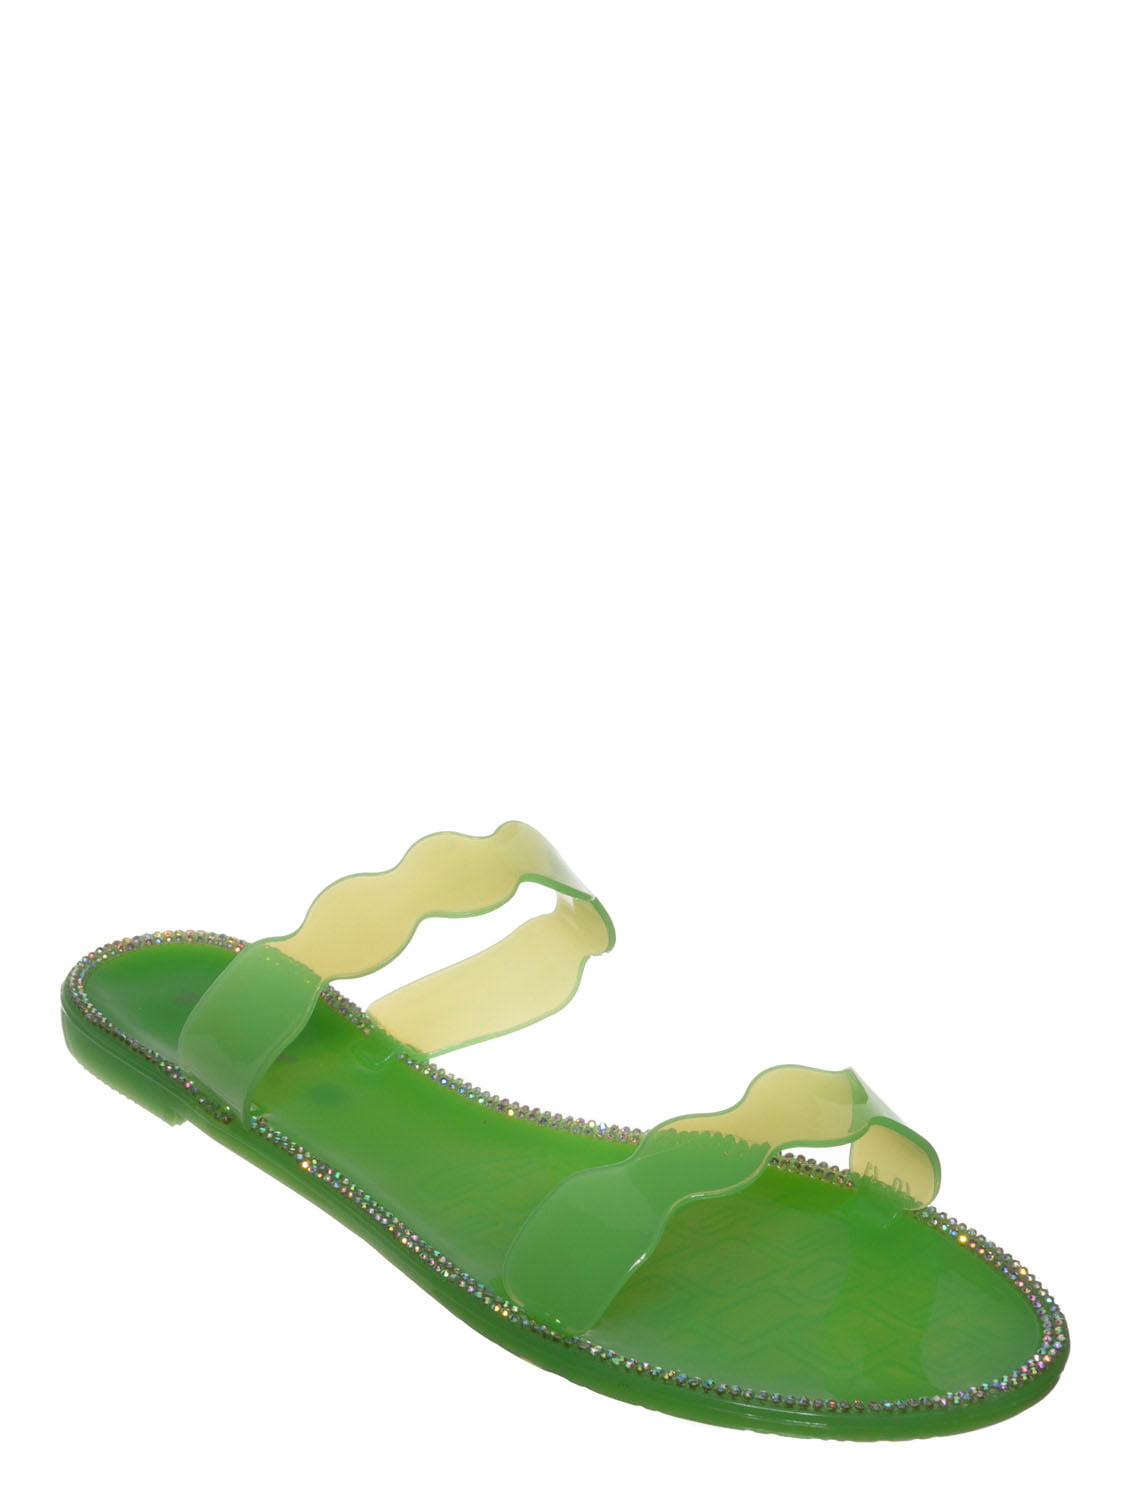 soft jelly sandals